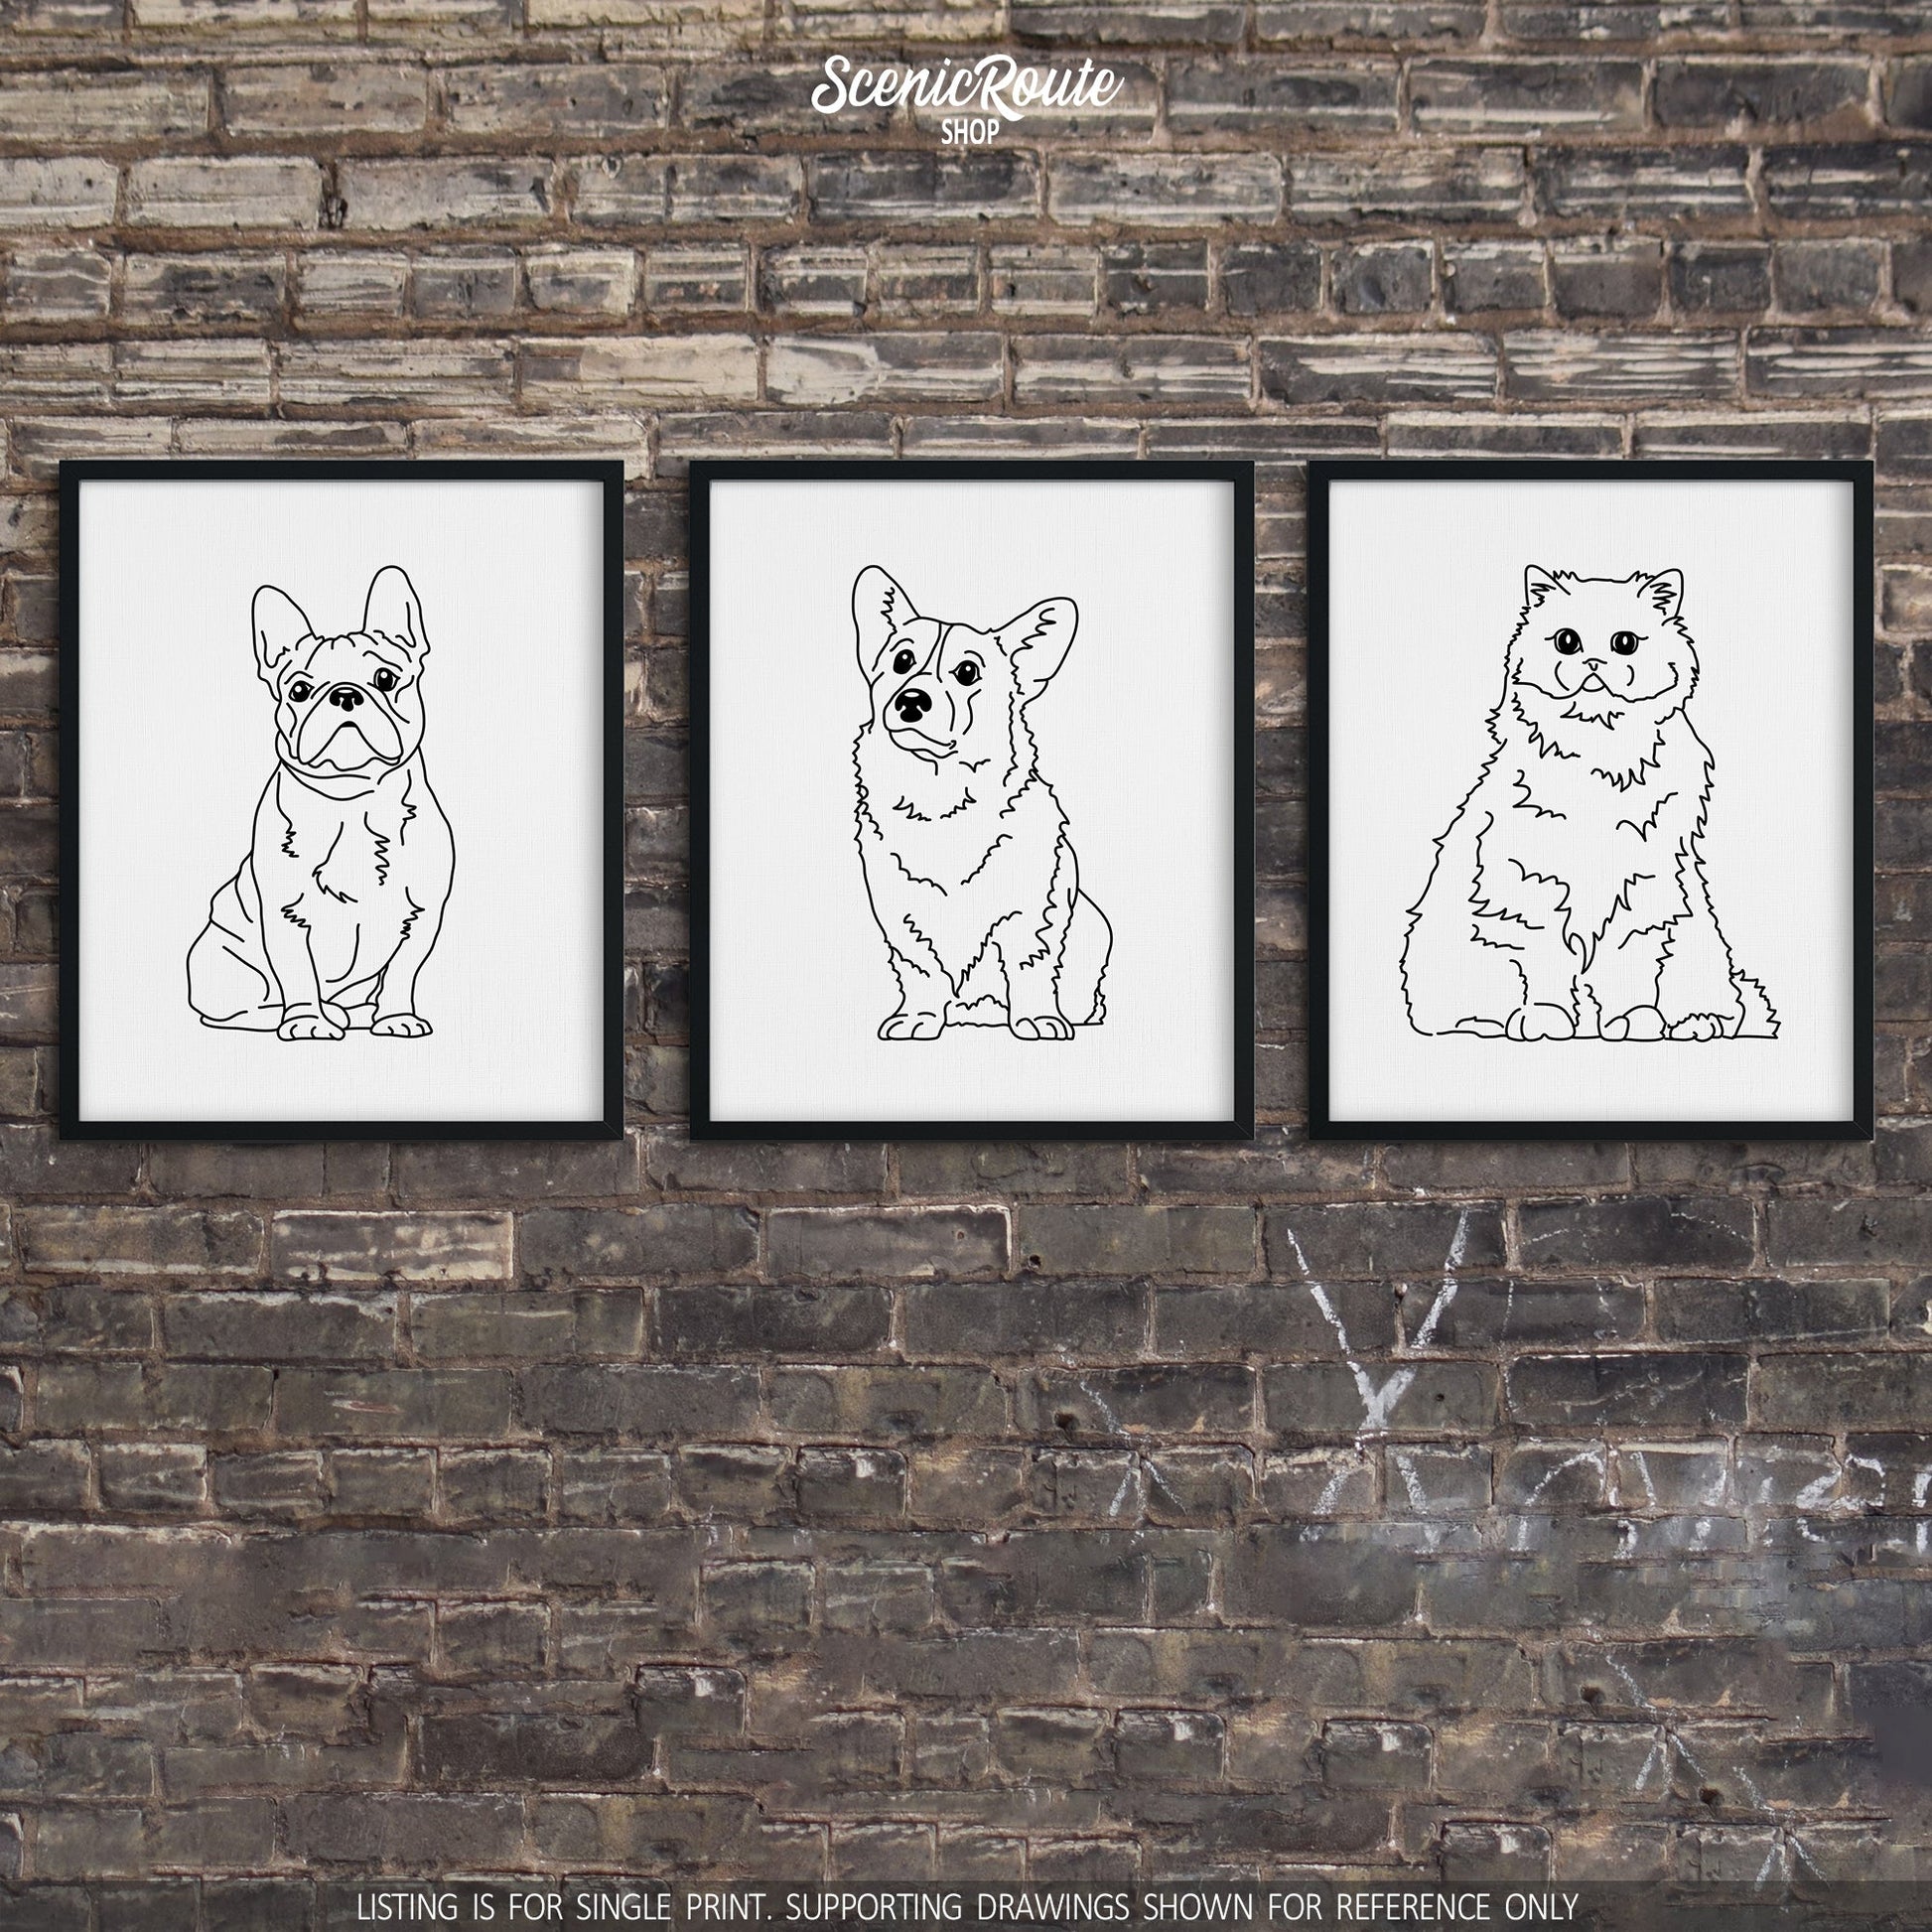 A group of three framed drawings on a brick wall.  The line art drawings include a French Bulldog, a Corgi dog, and Persian cat